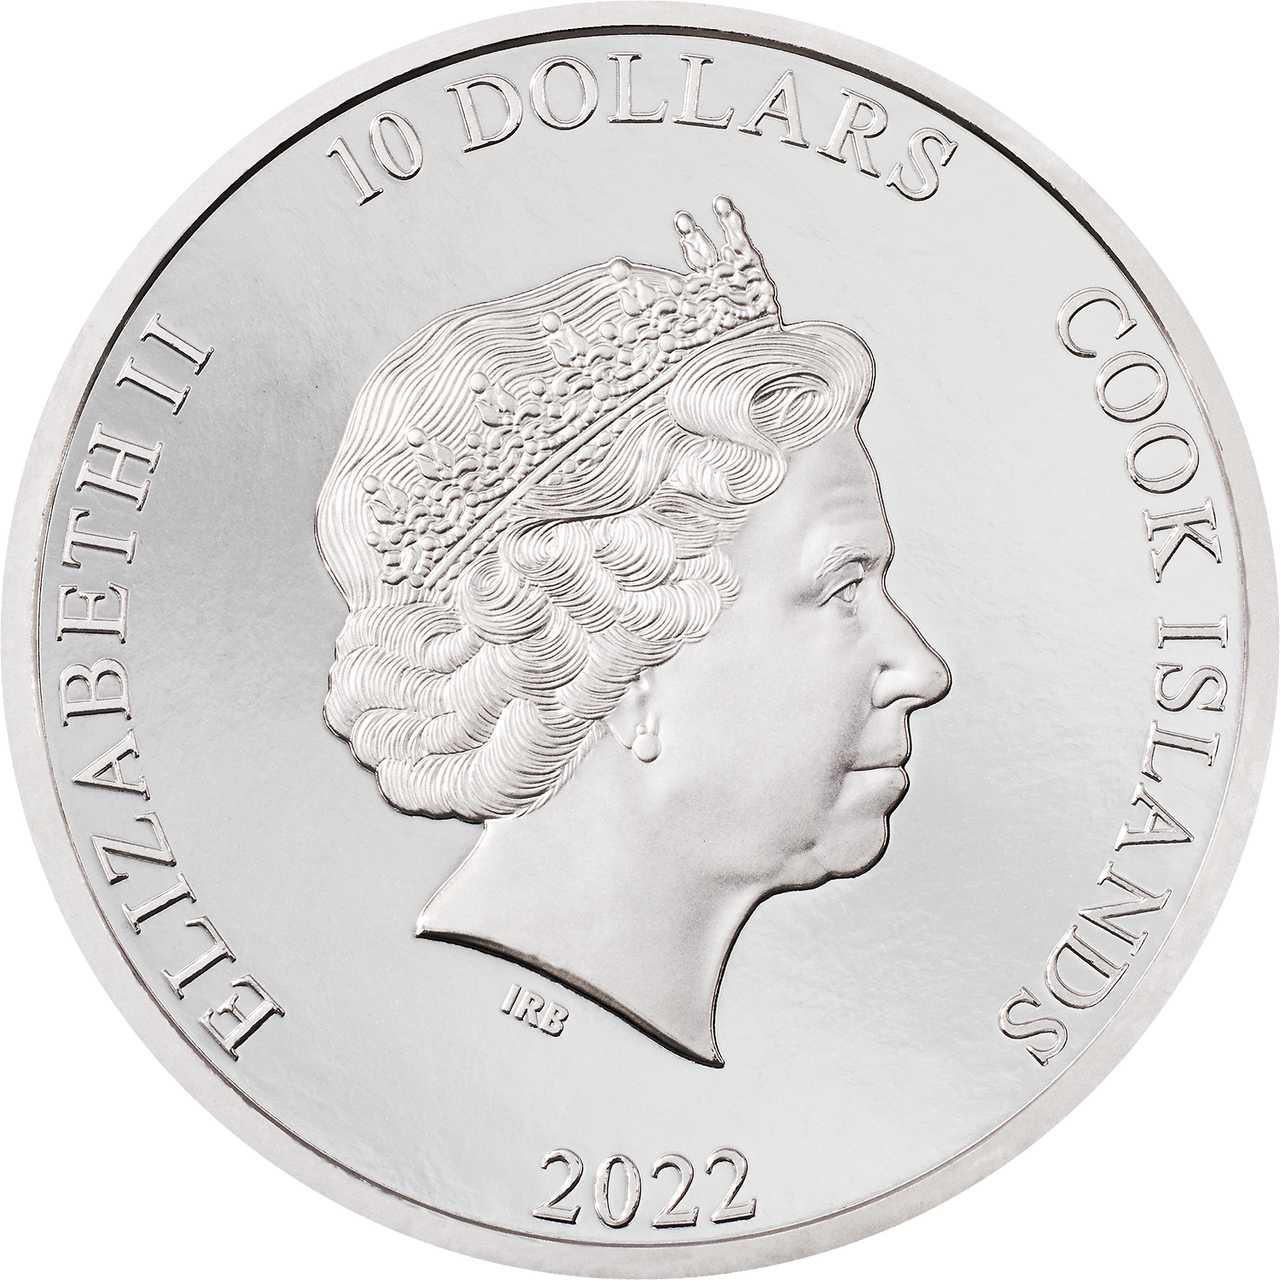 2021 Cook Islands $10 Silver Proof Coin - Silverland - The Rock